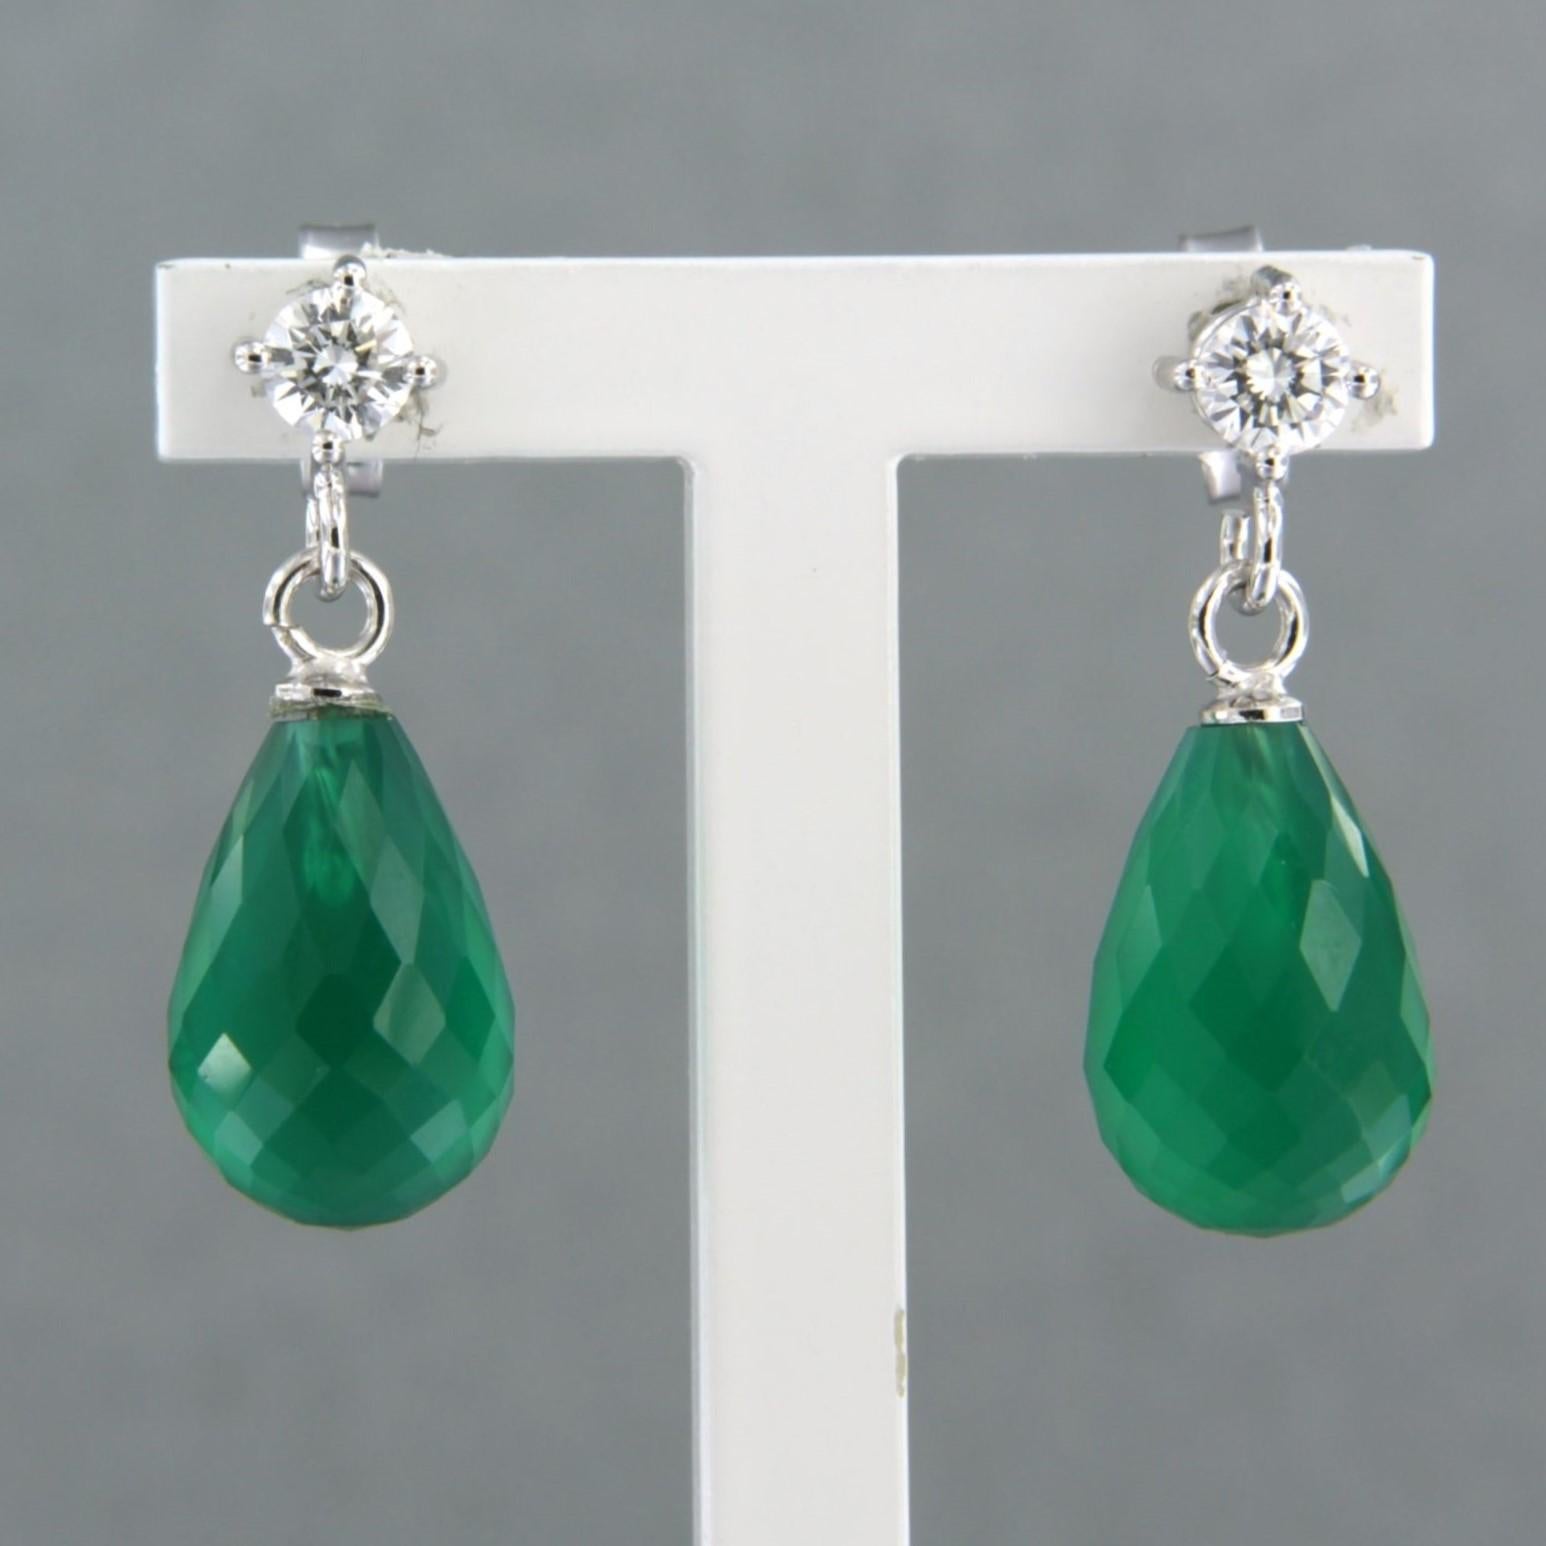 18k white gold earrings set with green onyx and brilliant cut diamonds. 0.26ct - F/G - VS/SI

detailed description:

the size of the earring is 2.0 cm long by 8.0 mm wide

weight 3.8 grams

set with

- 2 x 1.2 cm x 8.0 mm briolet cut onyx